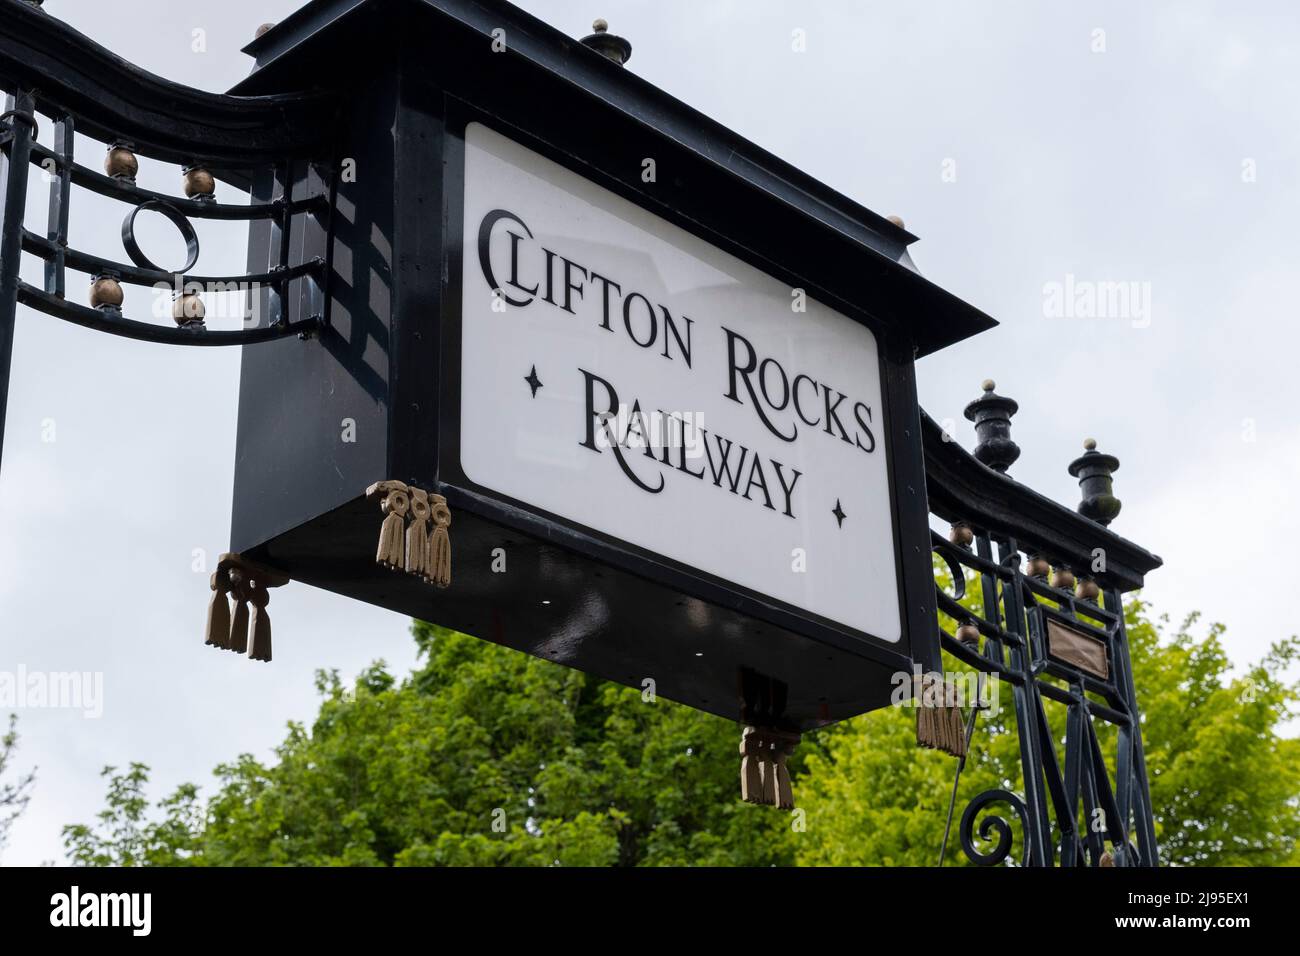 Old sign for Clifton Rocks Railway on 6th May 2022 in Bristol, United Kingdom. The Clifton Rocks Railway was an underground funicular railway linking Clifton at the top to Hotwells and Bristol Harbour at the bottom of the Avon Gorge in a tunnel cut through the limestone cliffs. Stock Photo